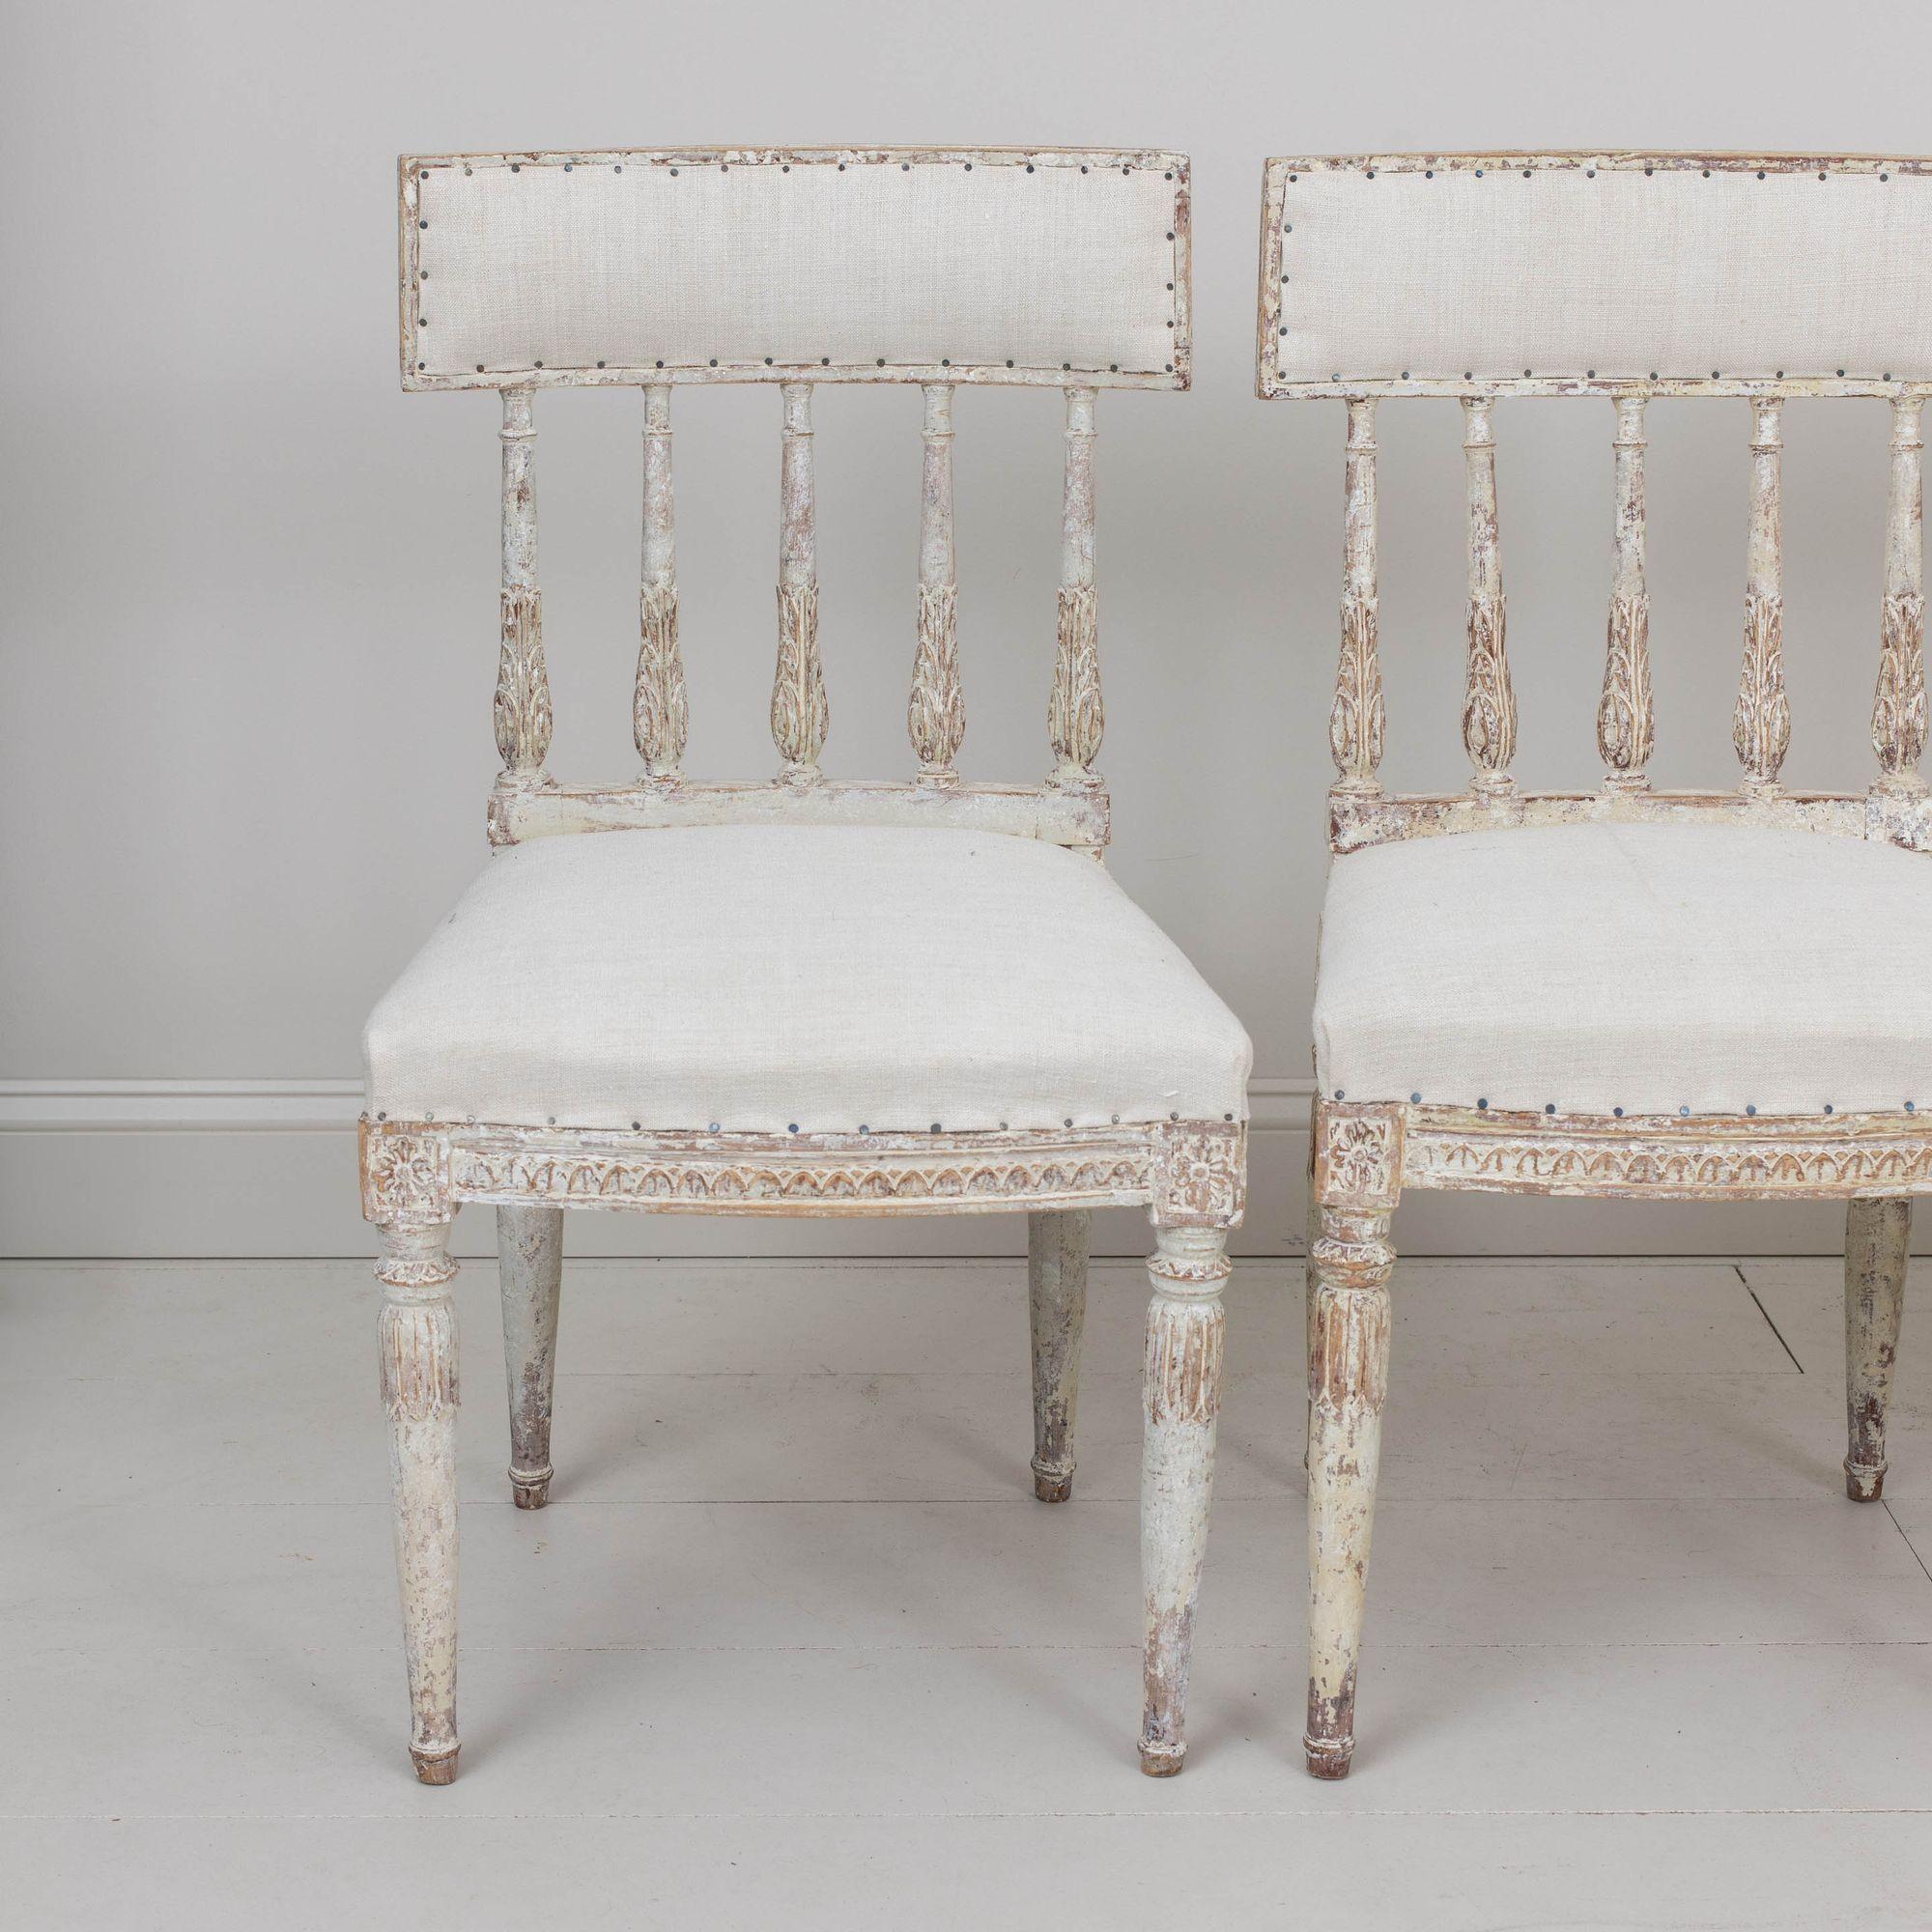 19th c. Set of Six Swedish Gustavian Period Chairs in Original Paint In Excellent Condition For Sale In Wichita, KS